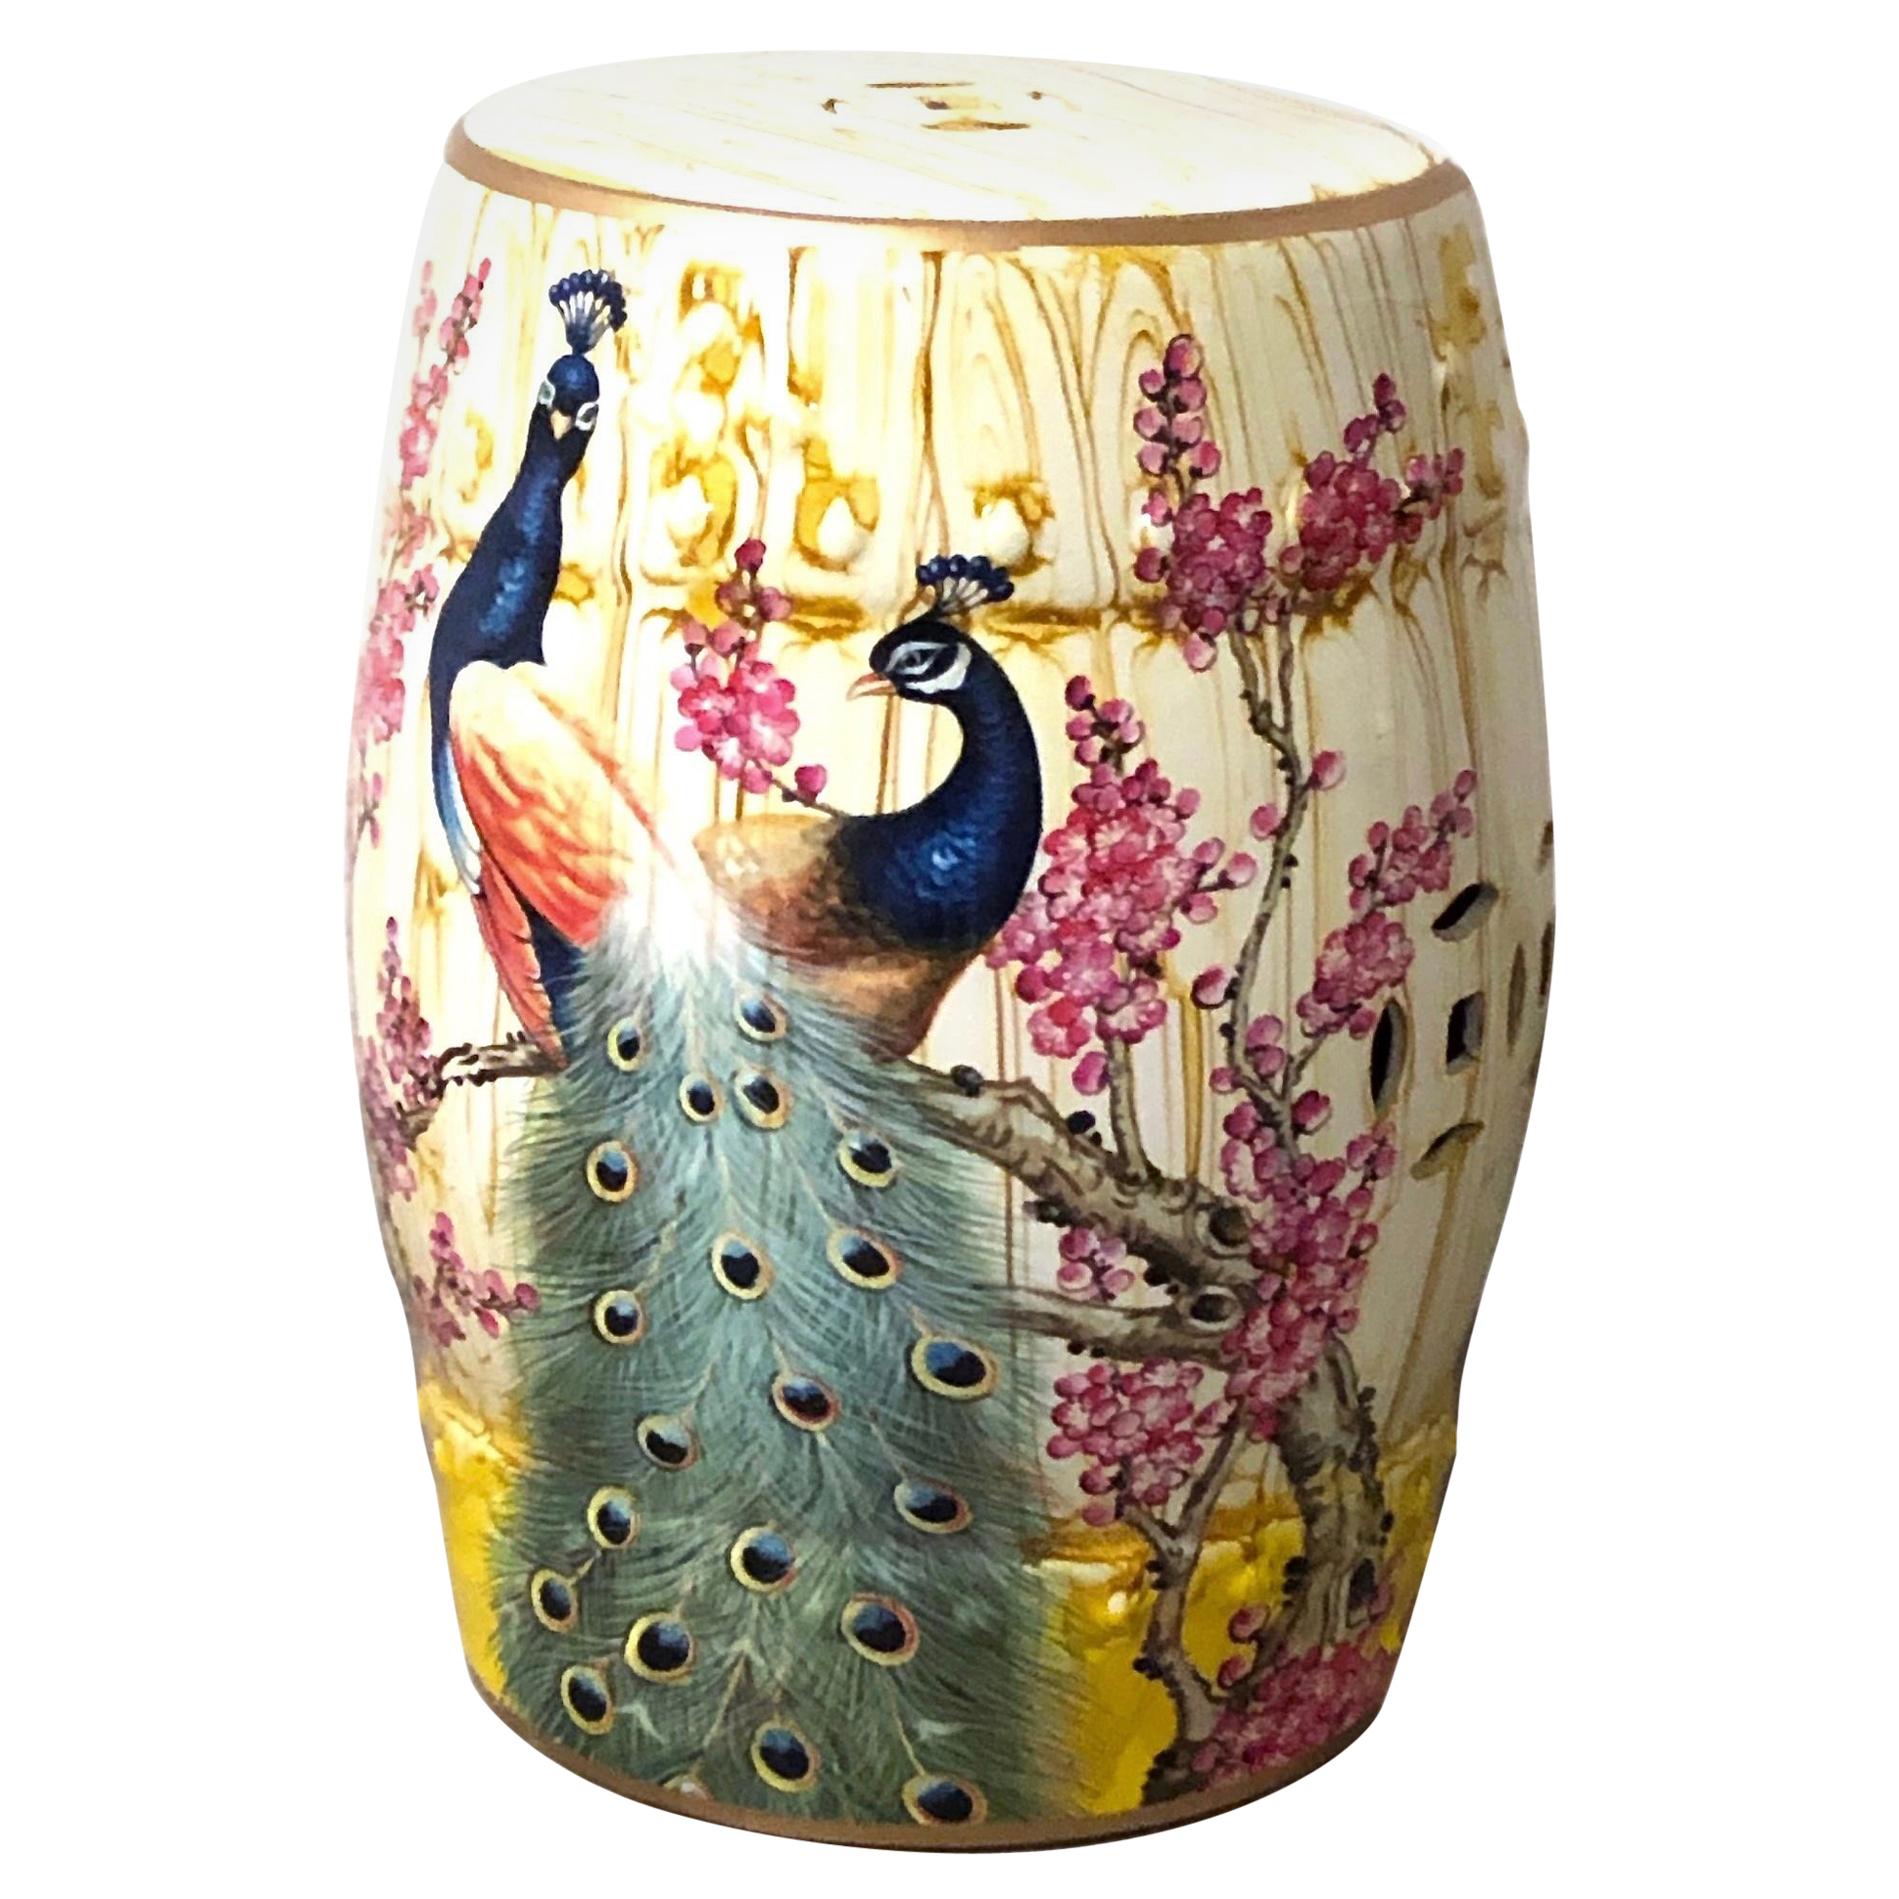 Mid-20th Century Chinese Export Hand-Painted Garden Stool Flower Pot Seat